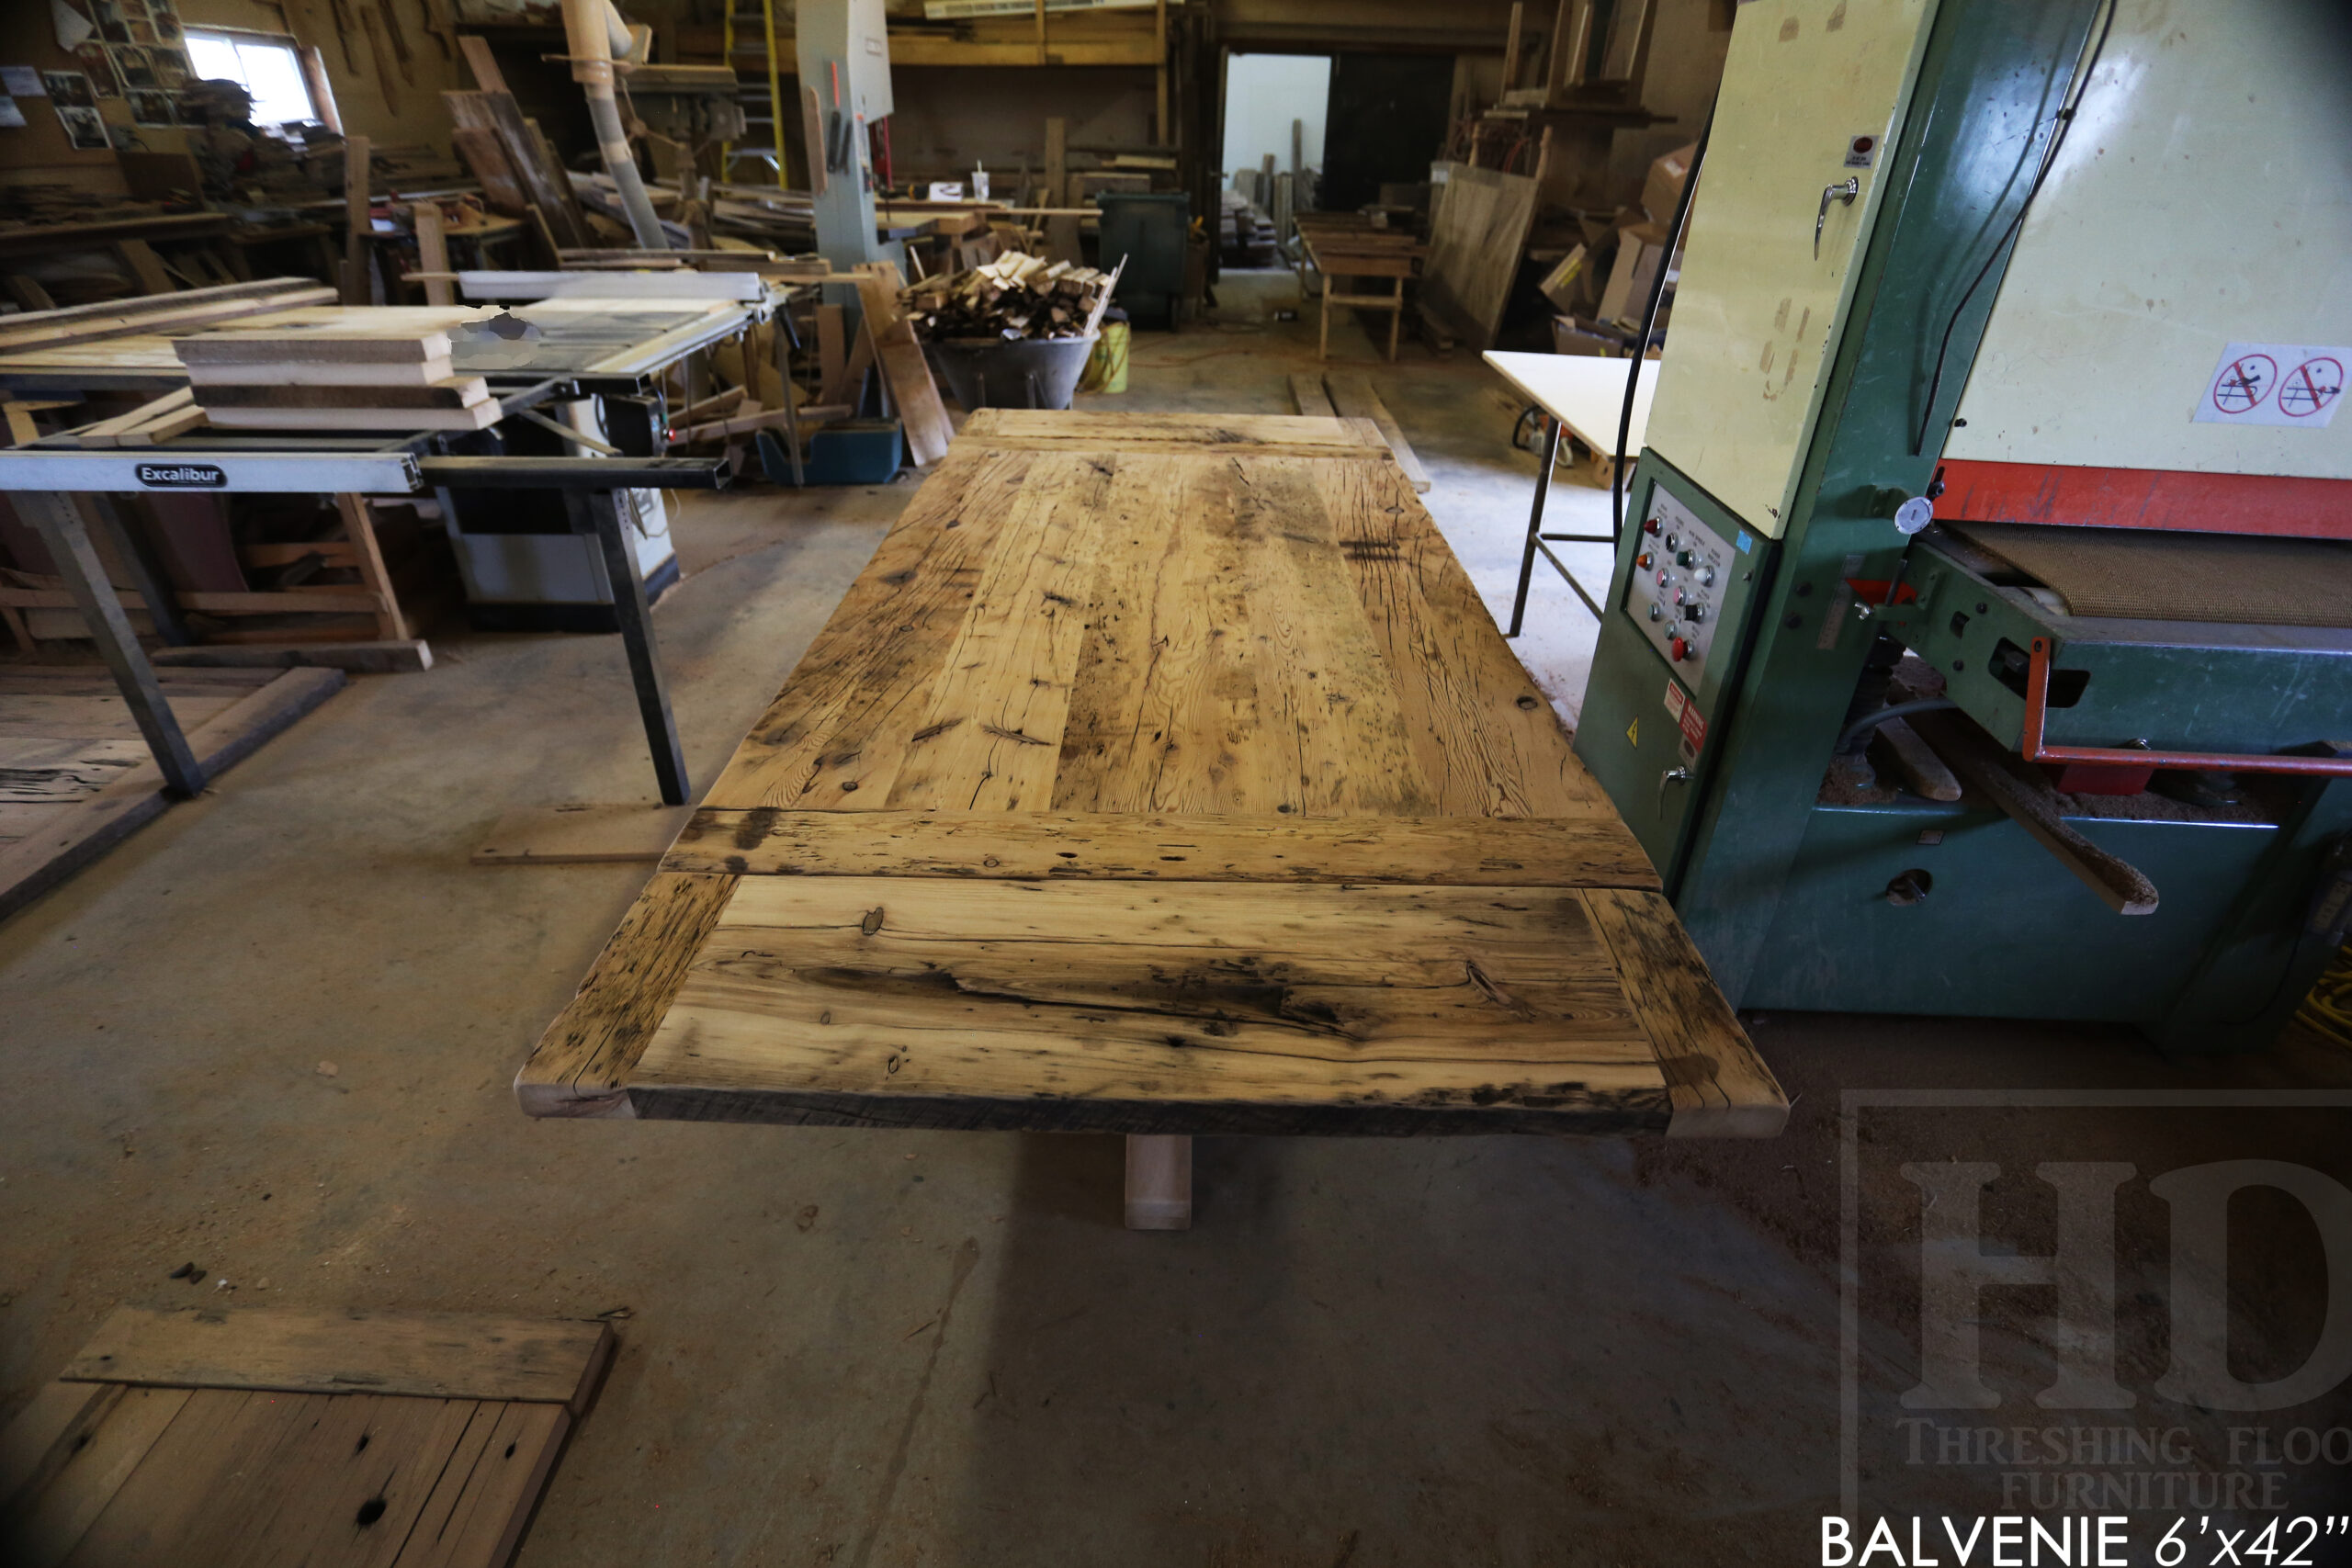 6' Reclaimed Wood Table for a Caledonia Home - 42" wide - Hand-Hewn Beam Pedestals Base - Hemlock Threshing Floor Construction - Original edges & distressing maintained - Premium epoxy + satin polyurethane finish - Two 12" Leaf Extensions - 18" Round Lazy Susan - 6' reclaimed wood bench / www.table.ca